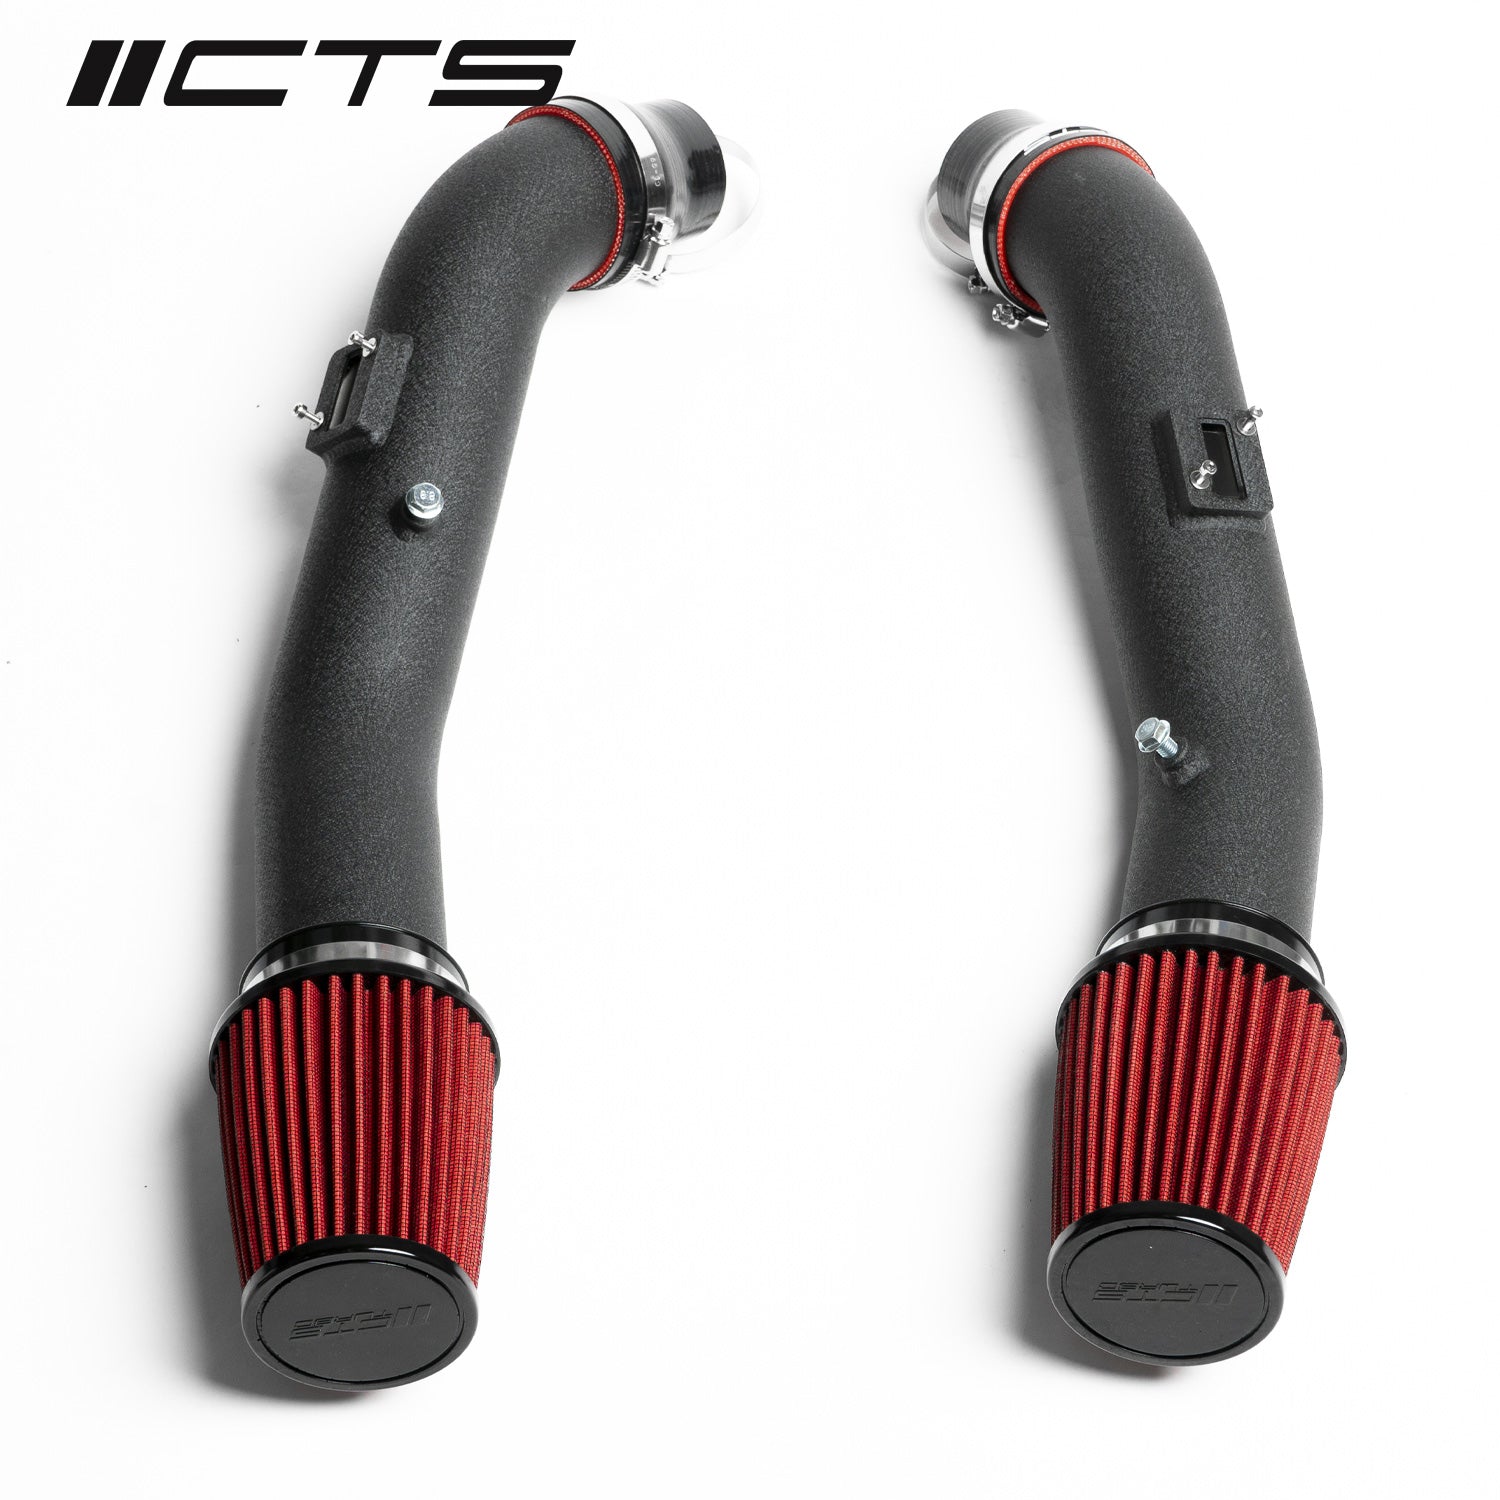 CTS TURBO R35 NISSAN GT-R INTAKE SYSTEM - 0